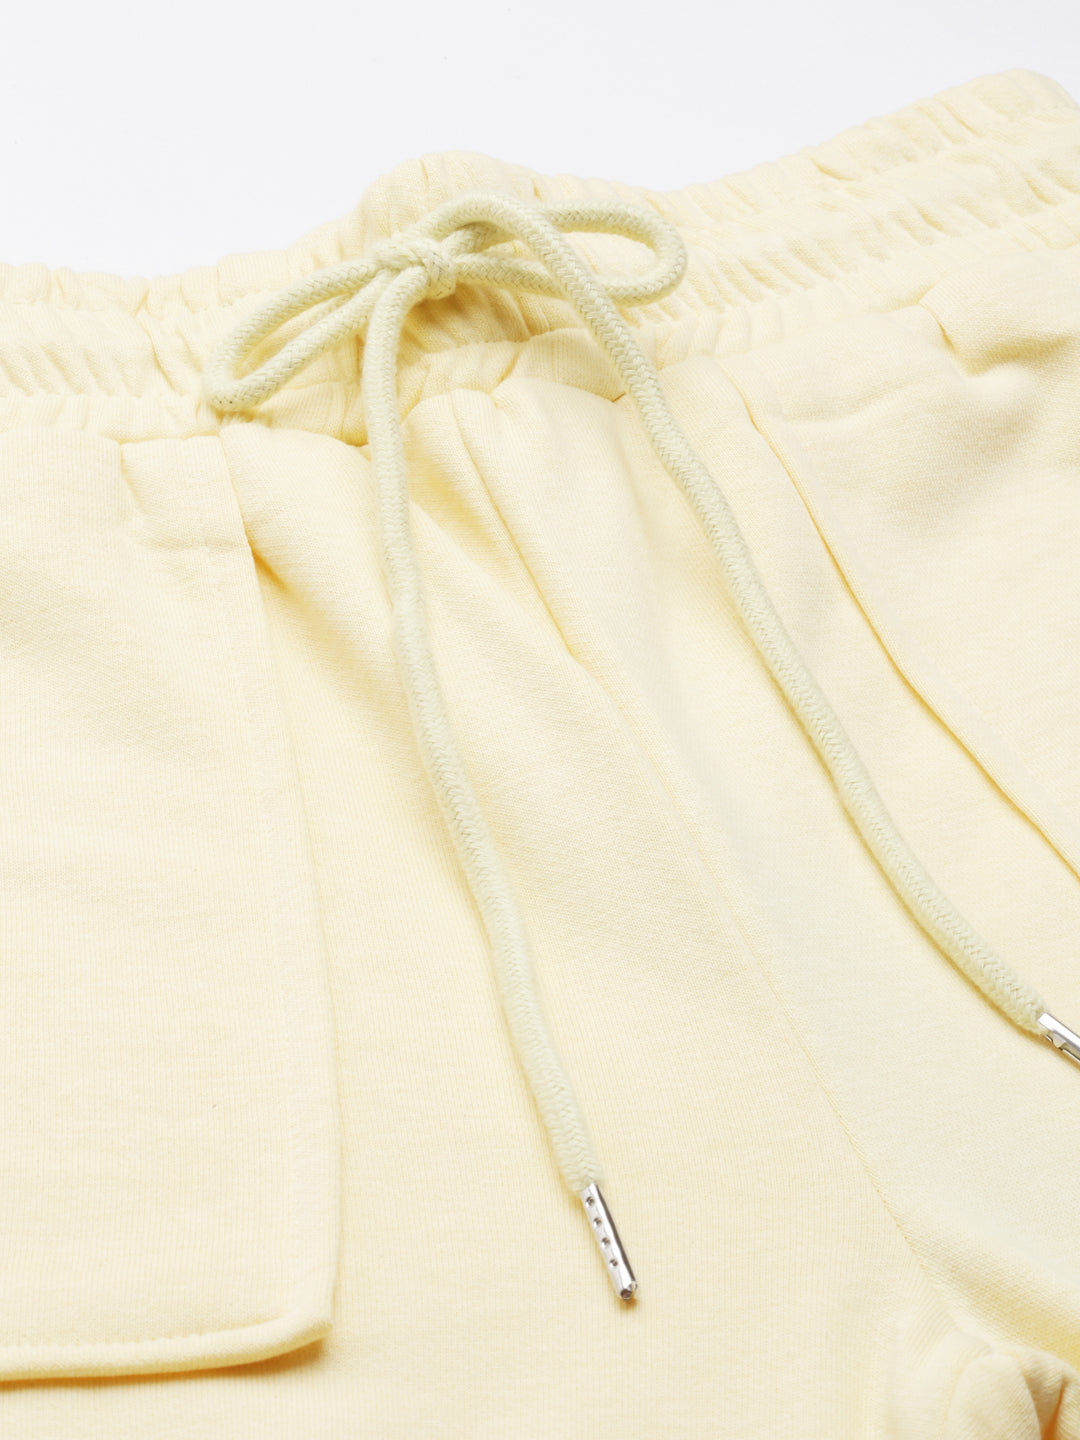 Women Yellow Solid Track Pant